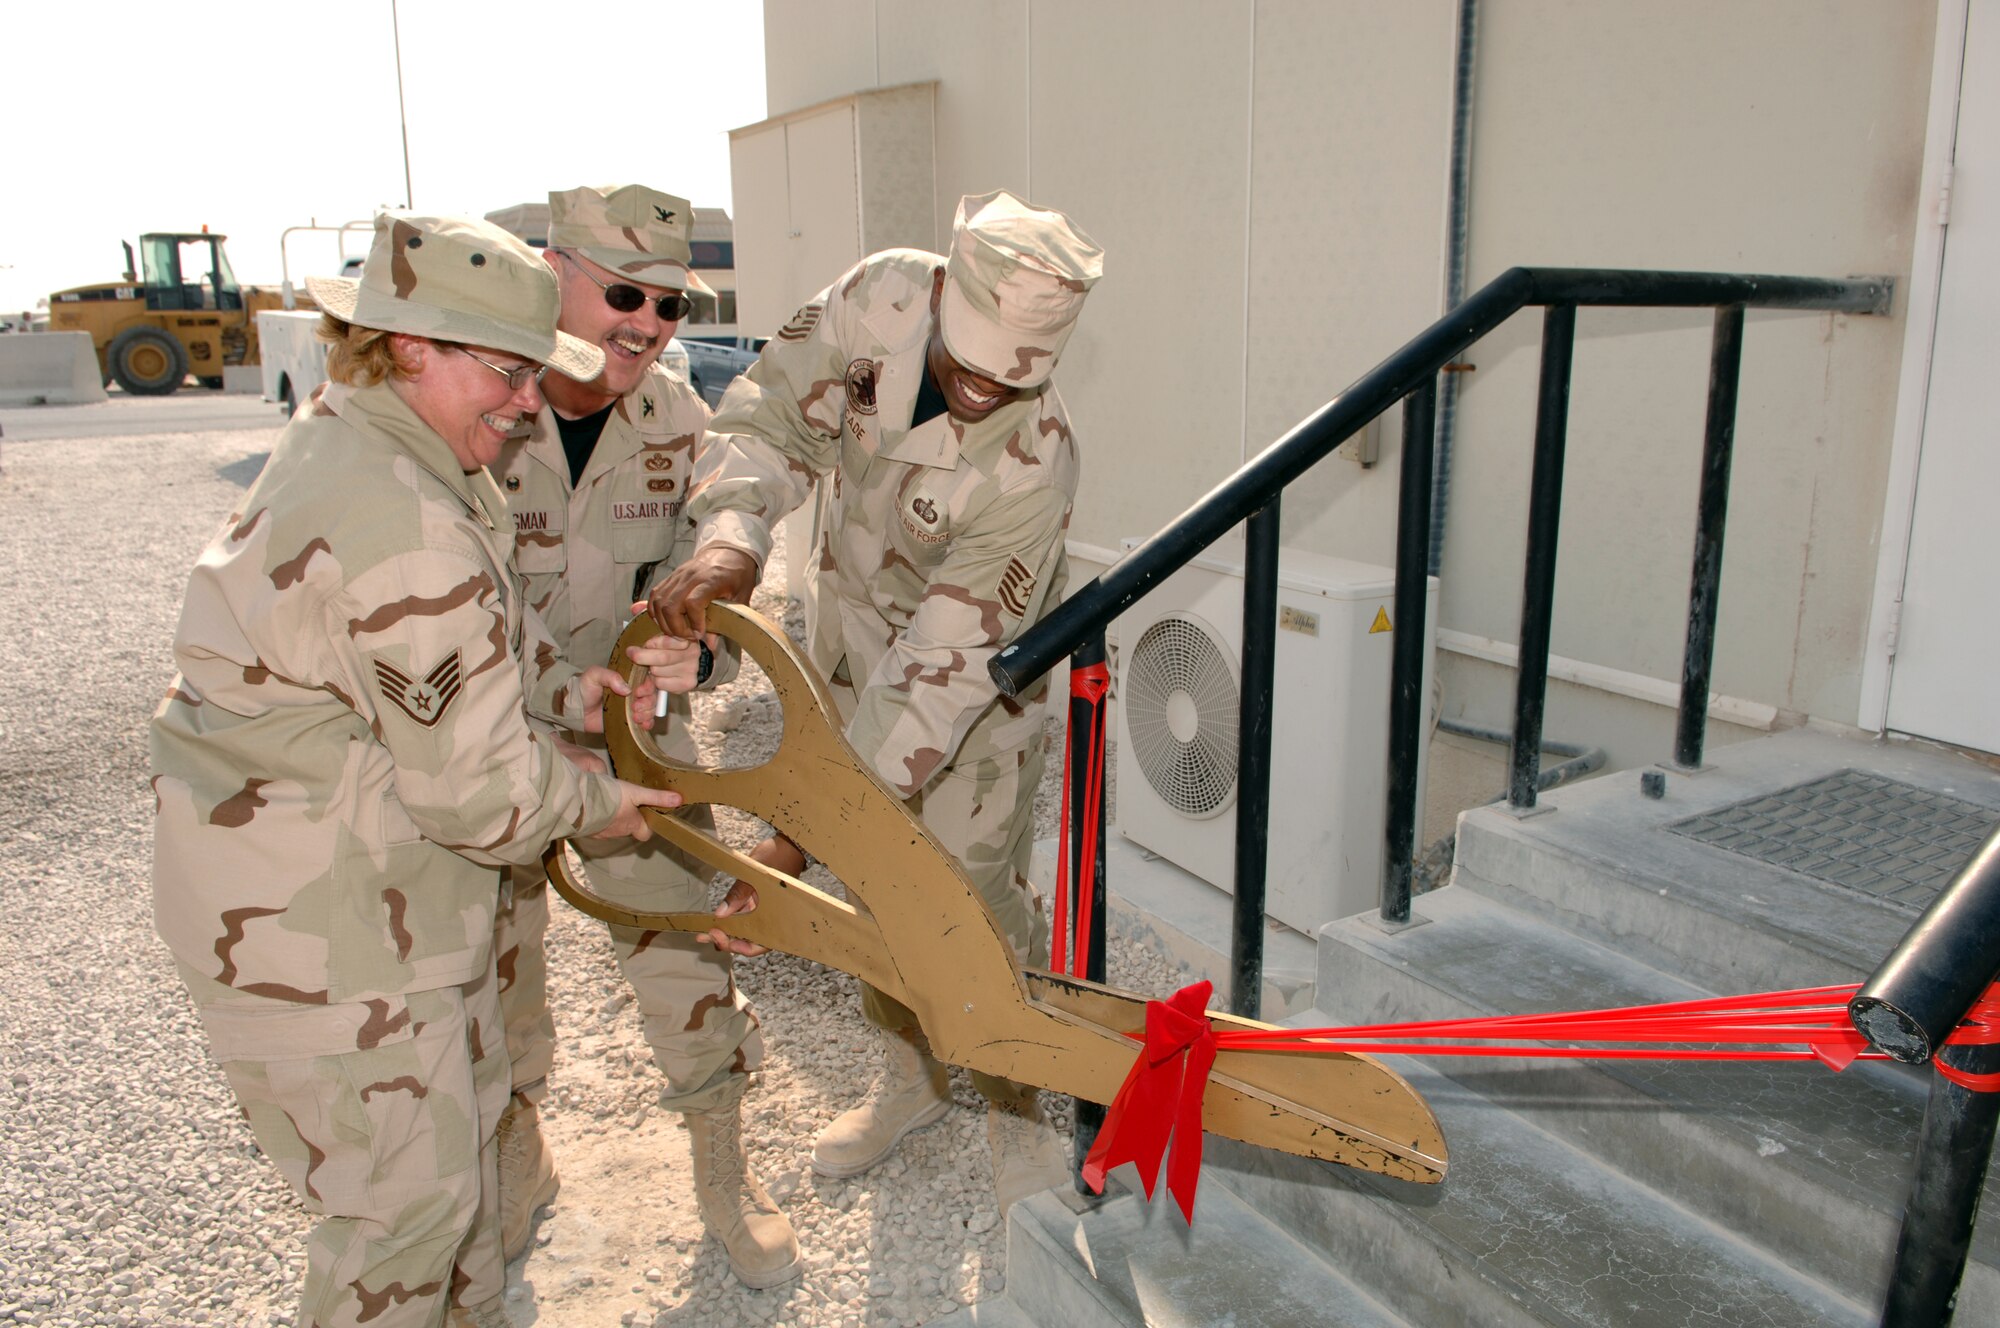 Col. Shane Stegman, 379th Expeditionary Mission Support Group commander (center) unveils the new media center here. The unit operates the largest contracting squadron in the Air Force, which holds 1,400 contracts worth $20 million. The group also developed a local virtual outprocessing system, saving more than 60,000 man hours a year. (U.S. Air Force photo by Airman 1st Class Ashley Tyler)